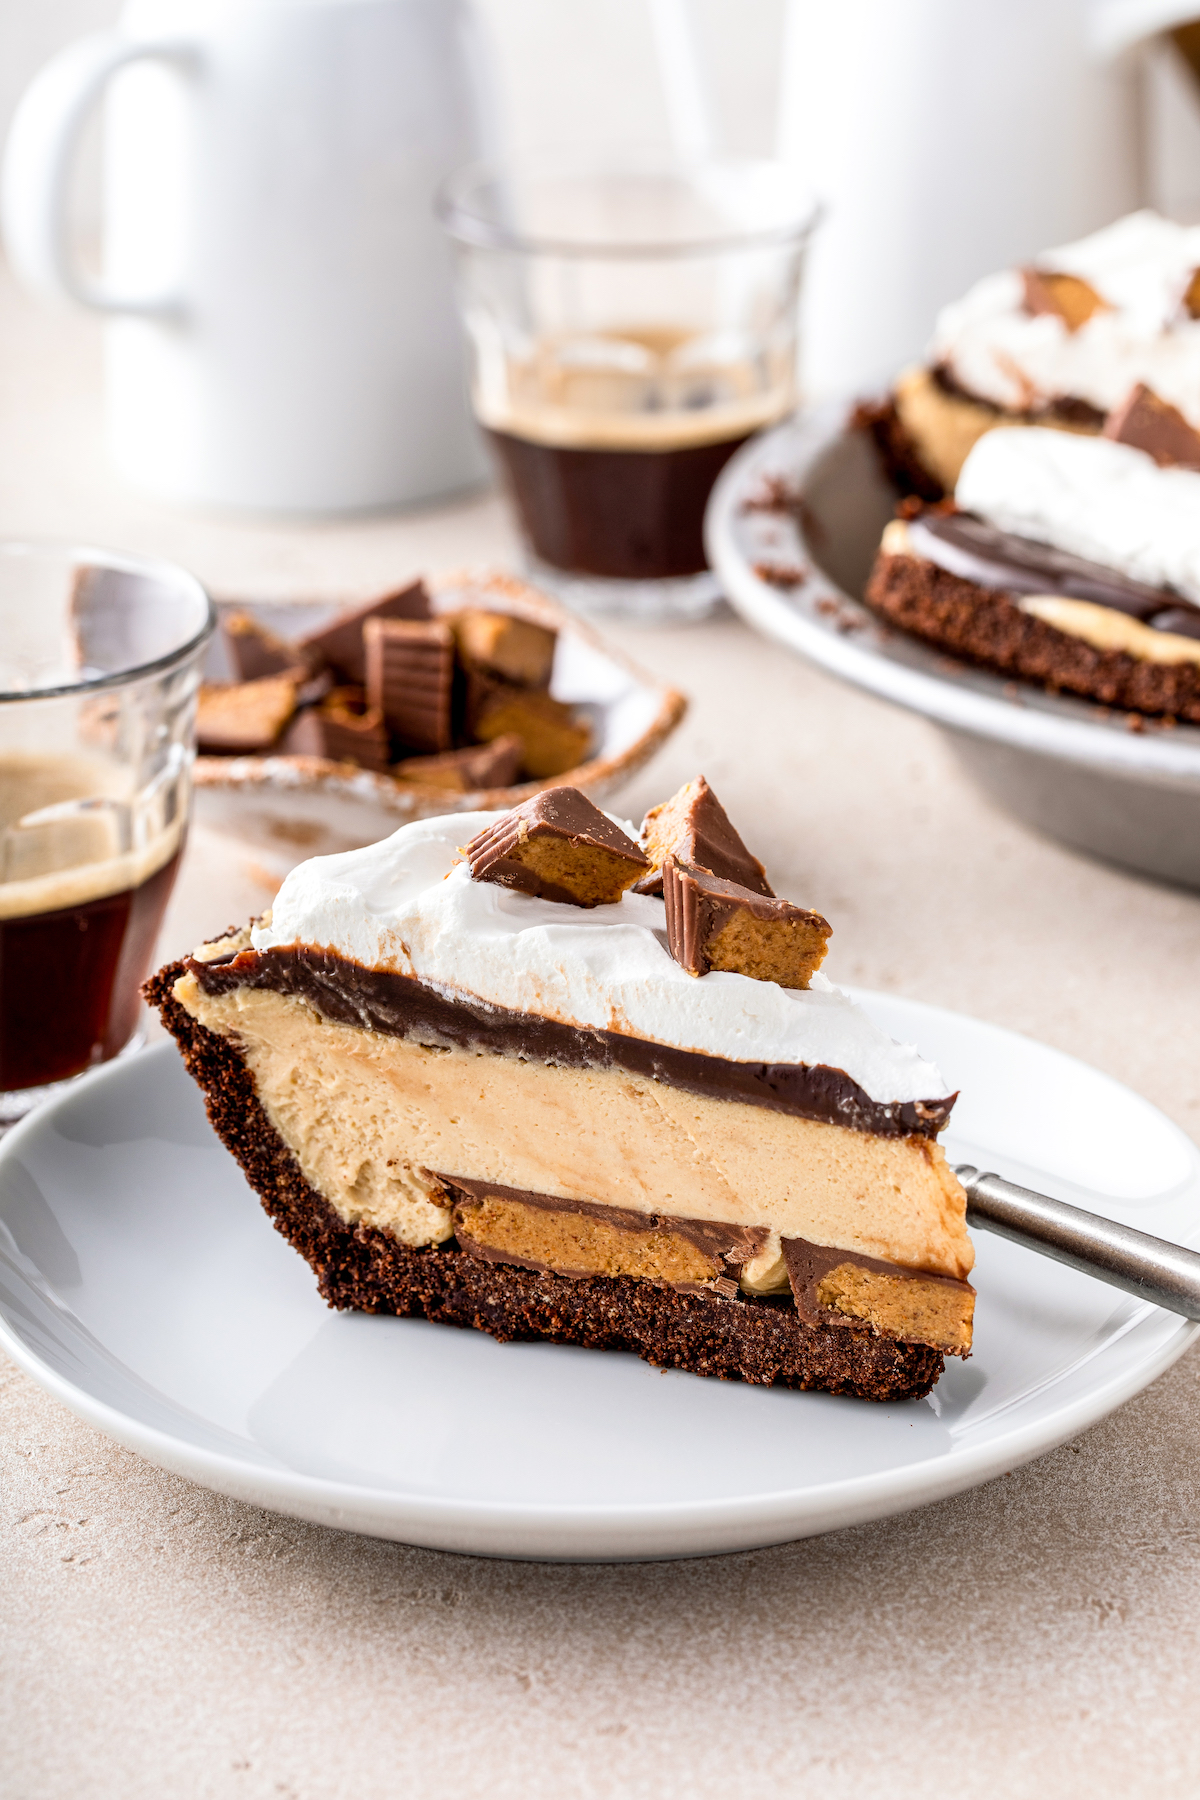 A slice of Reese's peanut butter pie on a plate.